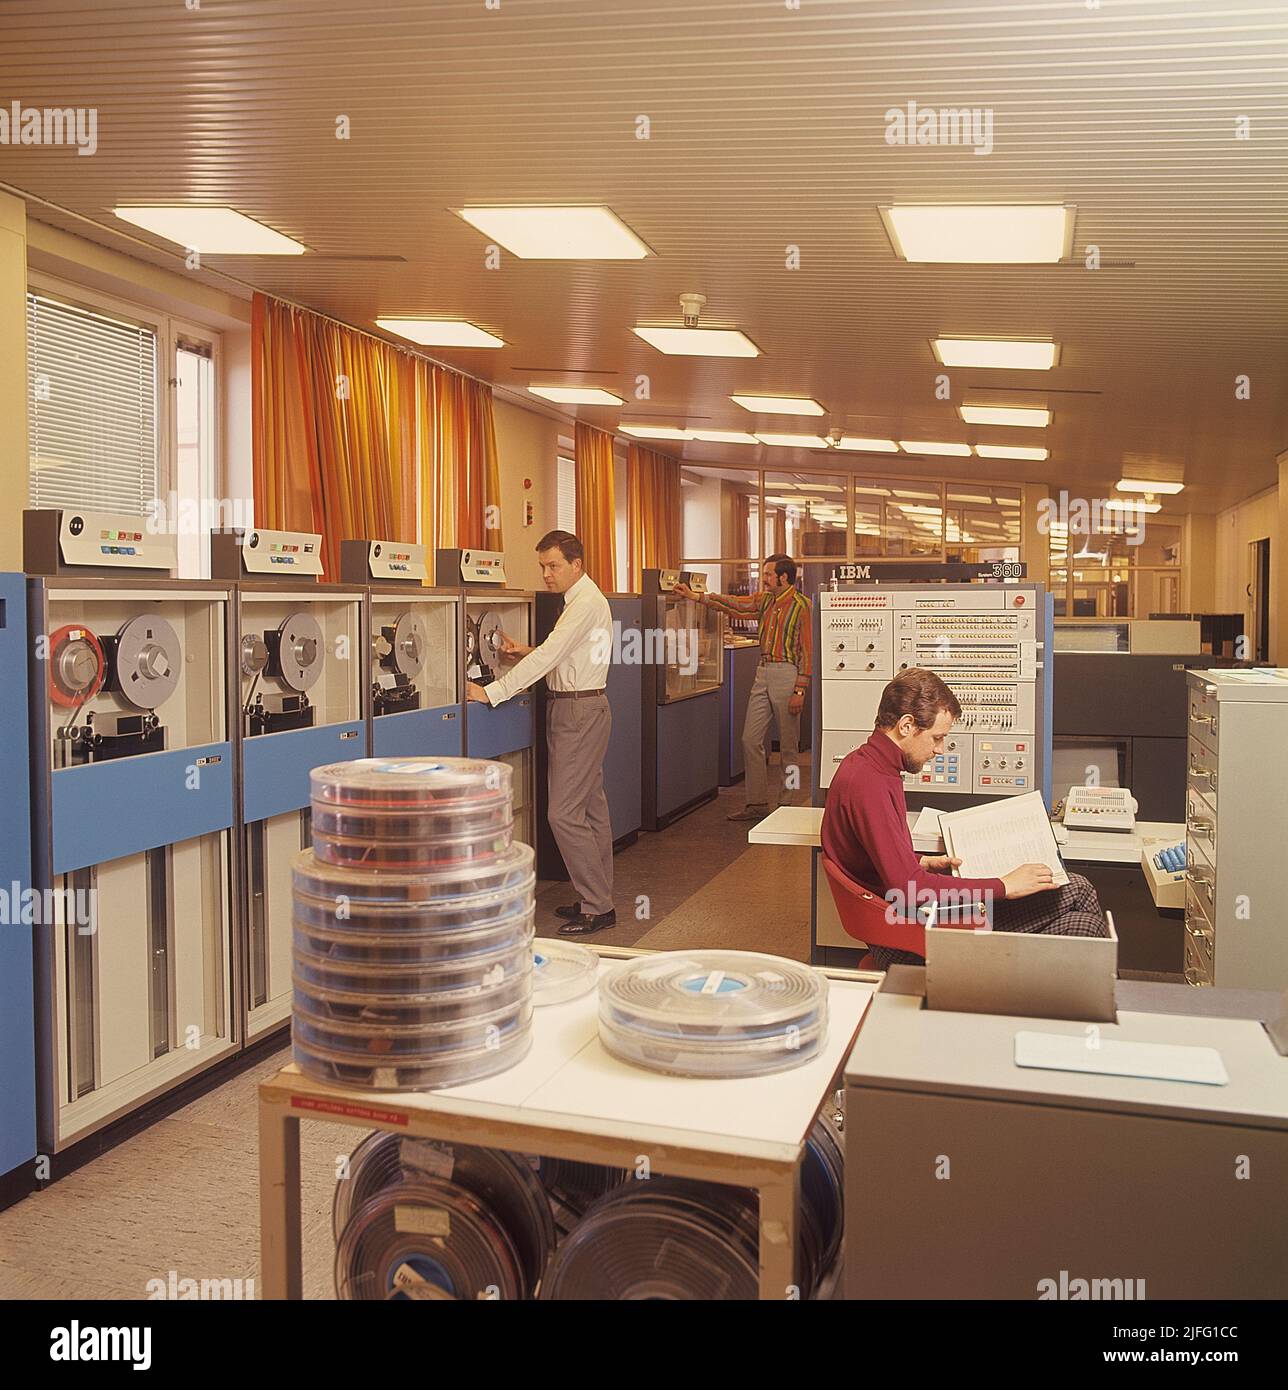 Computer engineering in the 1960s. An interior from the swedish government for employment that handles information with computers, and IBM system 360 with units to read datatapes and terminals to enter and register information. A picture like this represents the first steps towards the digital society where people became social security numbers. IBM system 360 was frequently seen in the american television-series Mad Men. Picture taken 1966. ref CV16-5 Stock Photo